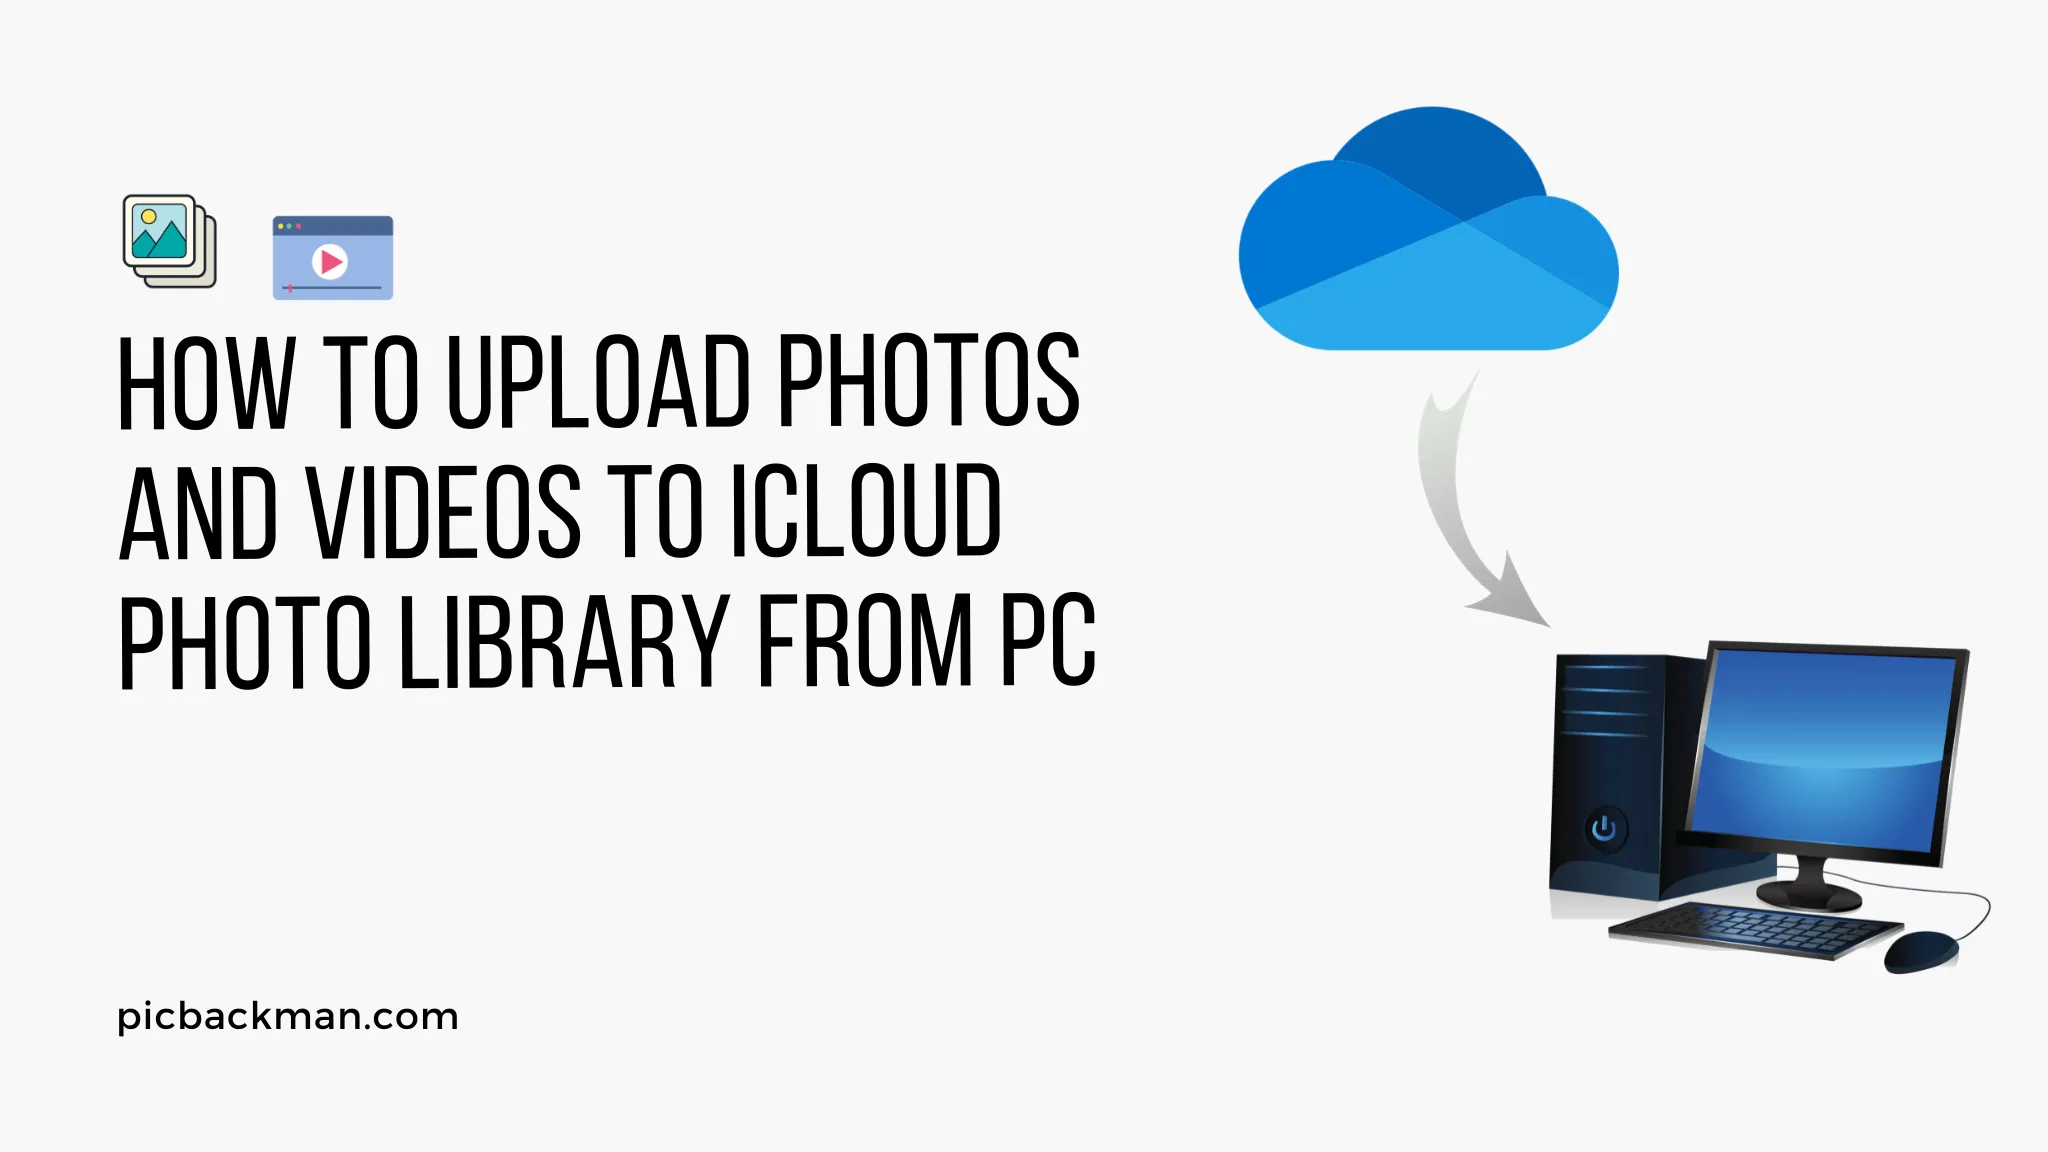 How to upload photos and videos to iCloud Photo Library from PC